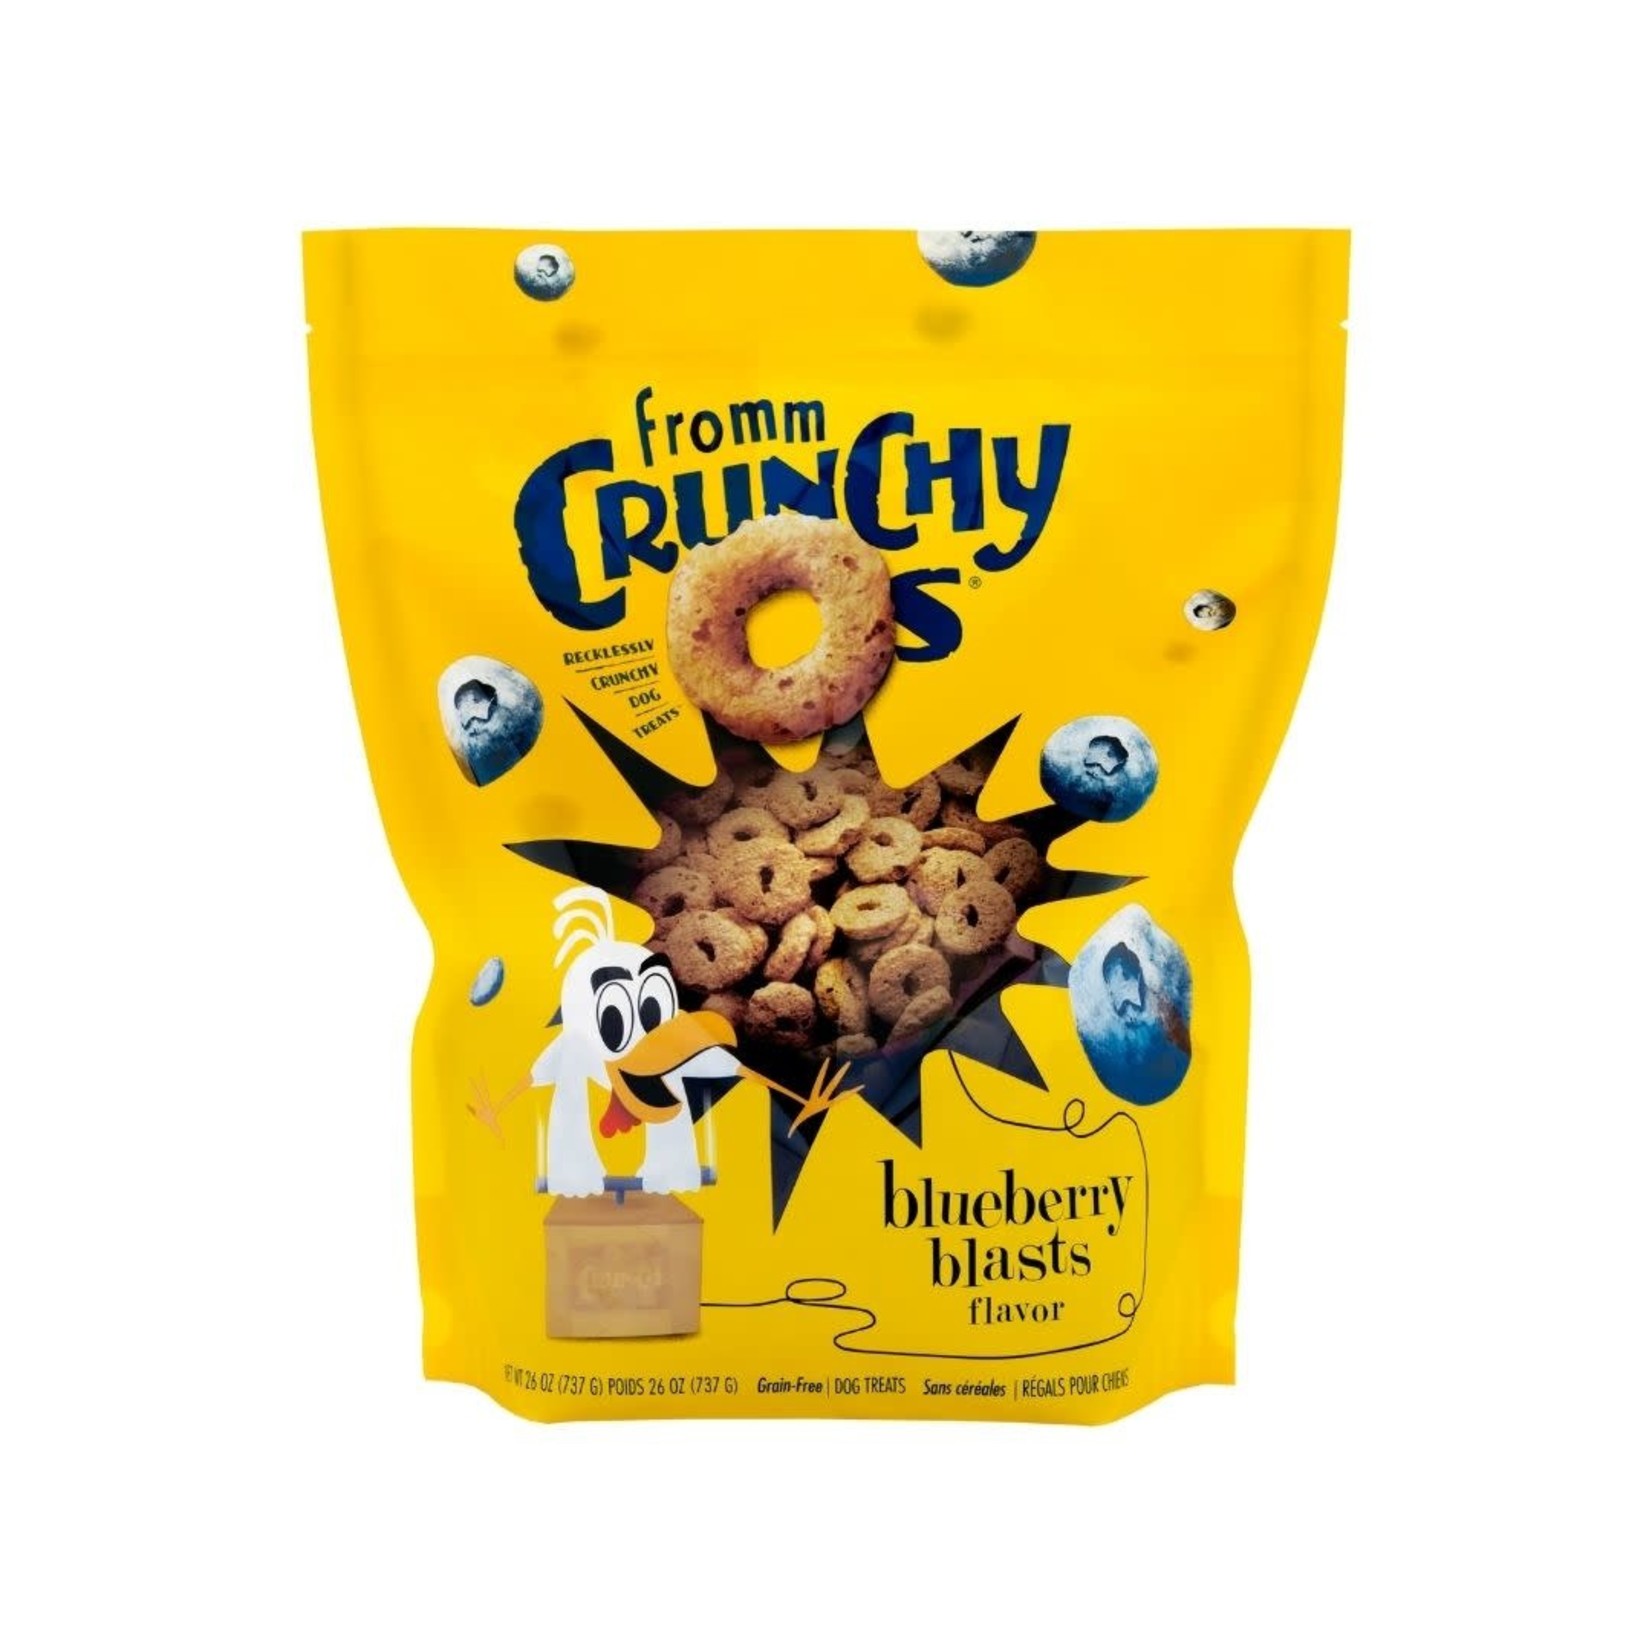 Fromm Fromm Crunchy Os Blueberry Blasts Flavor